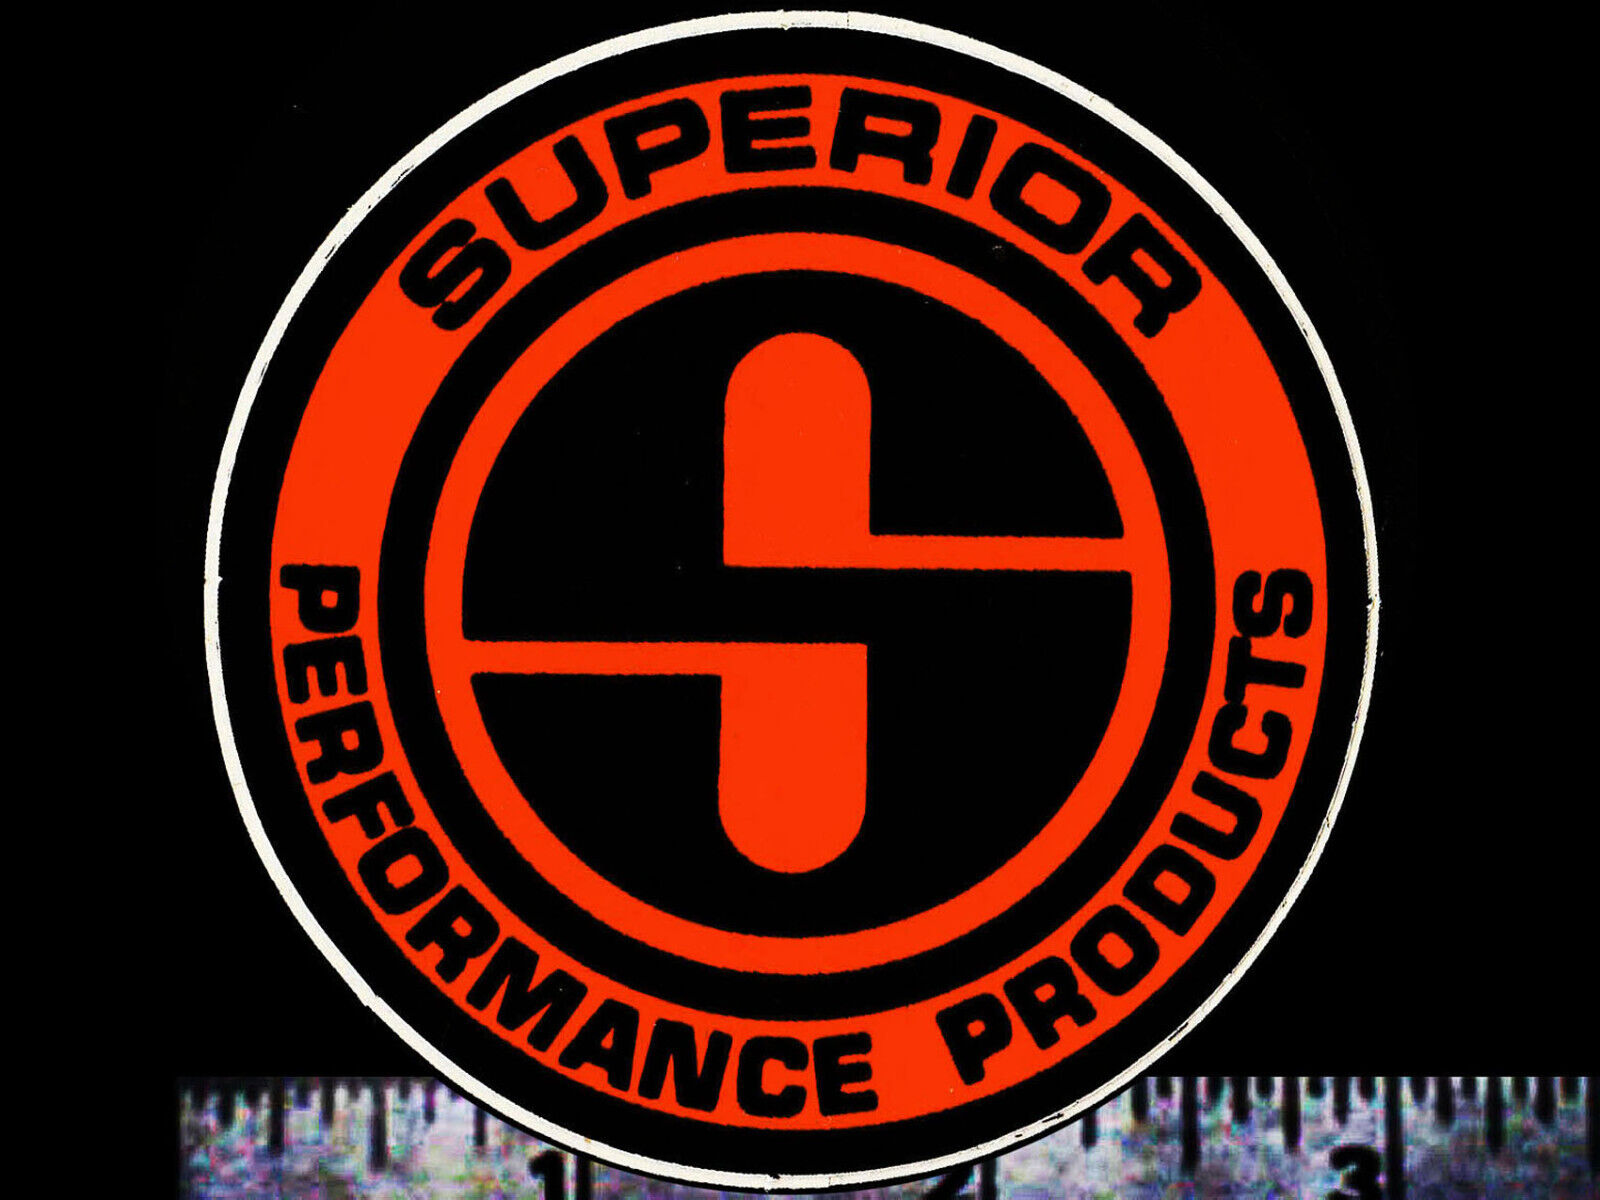 SUPERIOR Performance Products - Original Vintage 60’s 70’s Racing Decal/Sticker